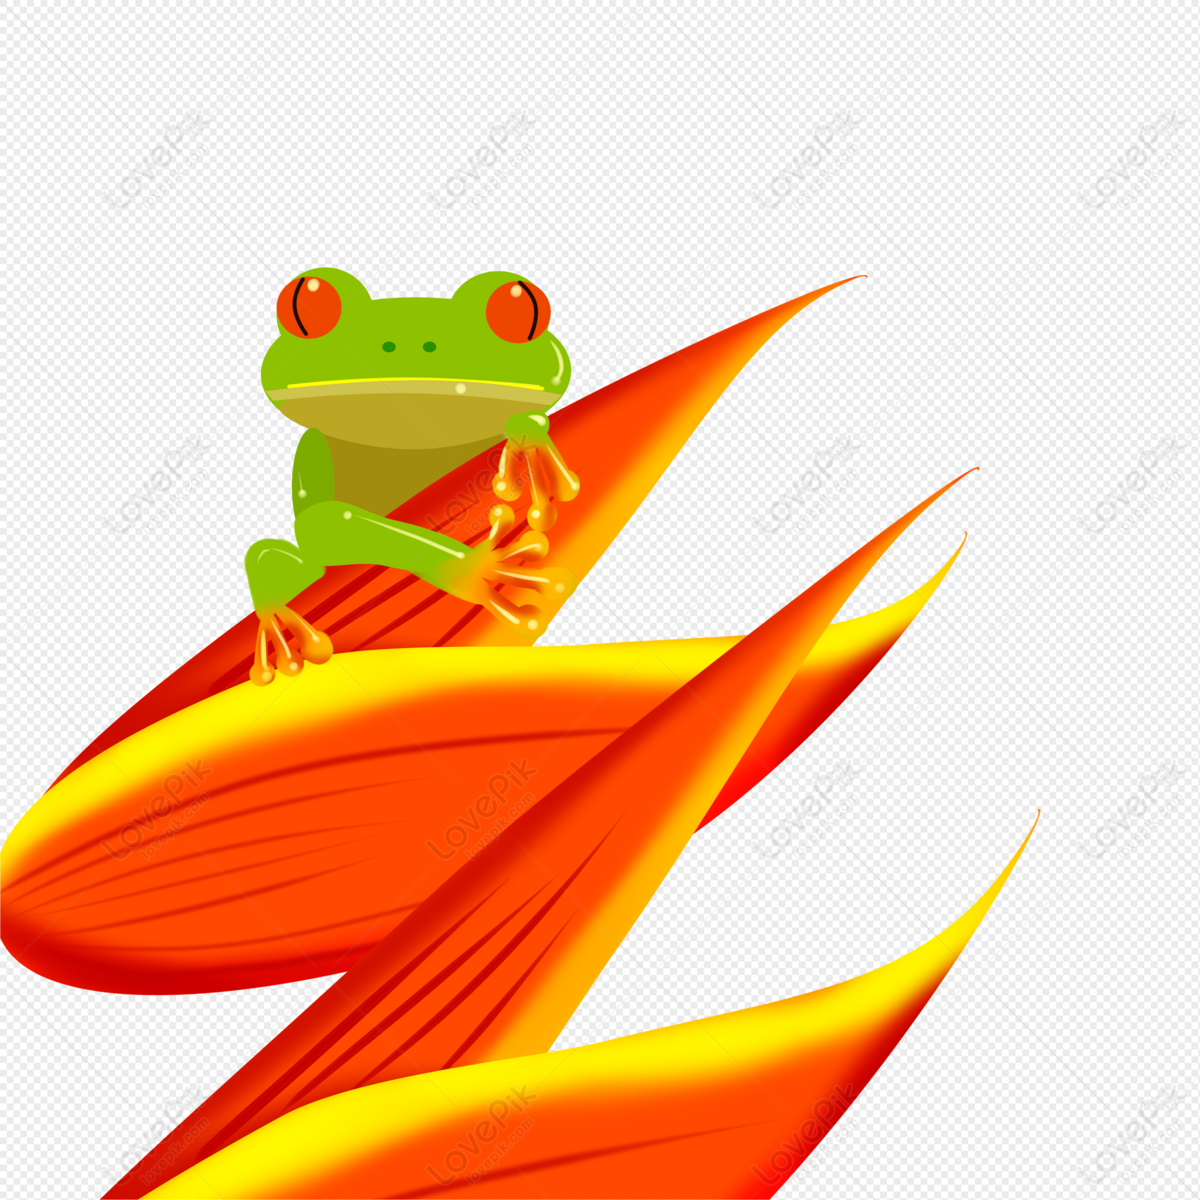 Tree Frog PNG Images With Transparent Background | Free Download On Lovepik